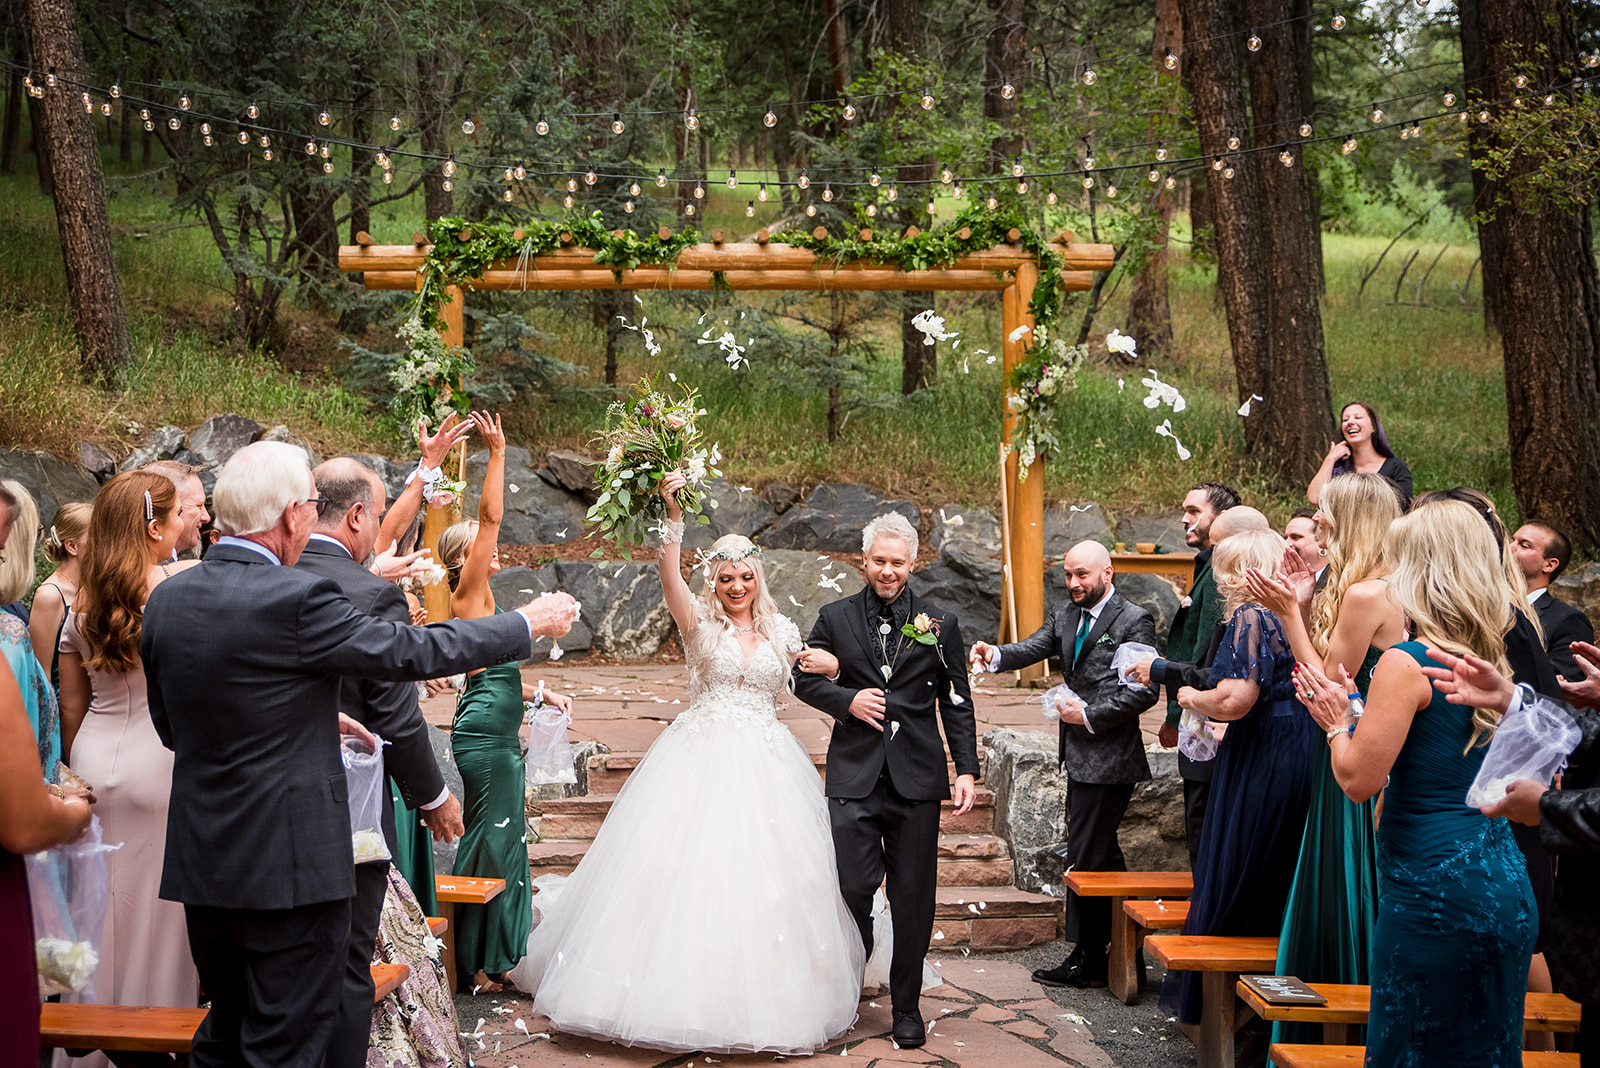 Bride and groom exit wedding ceremony hand in hand as audience celebrates by throwing petals. 